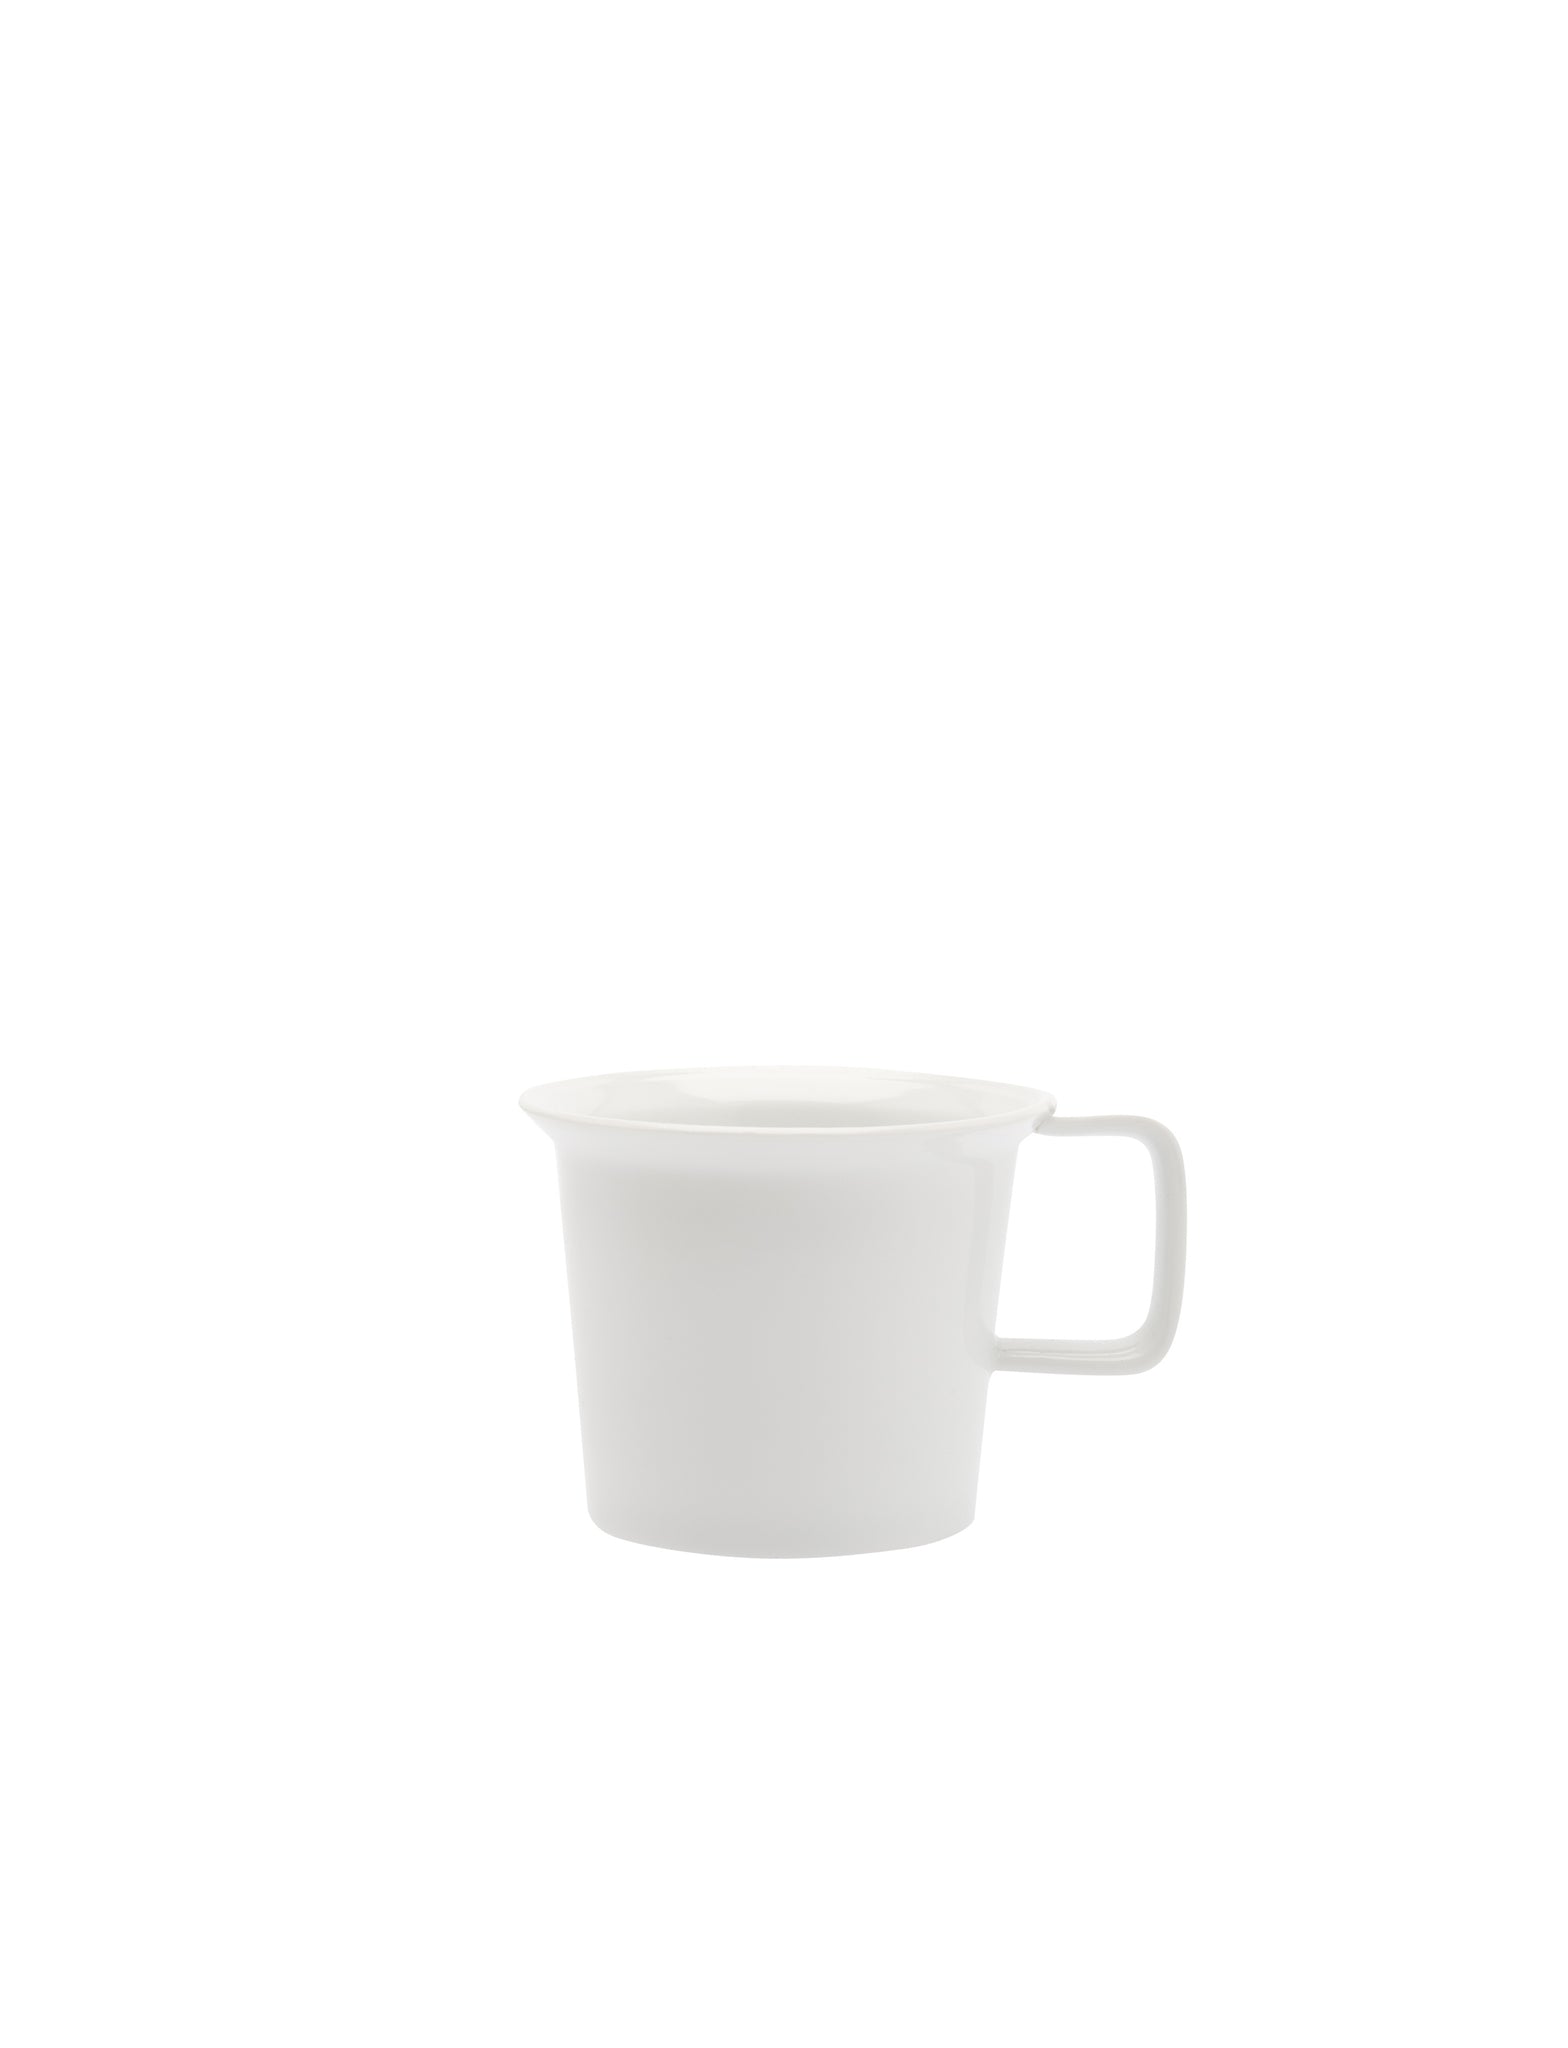 TY Coffee Cup handle glazed white